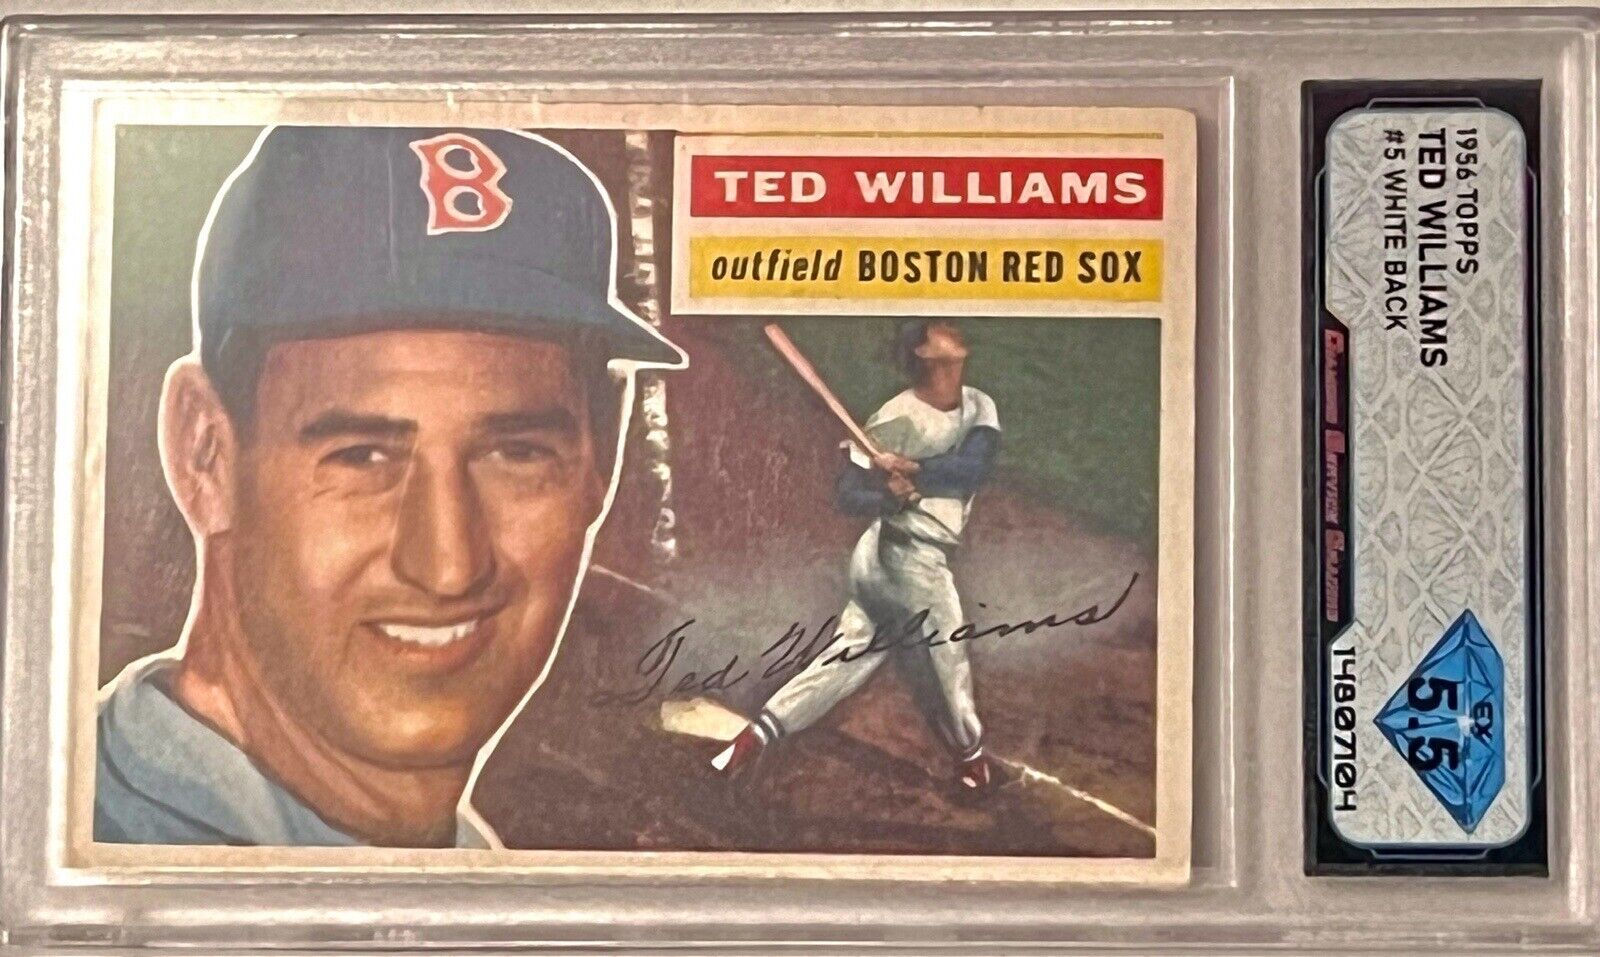 1956 topps Ted Williams DSG 5.5 -Scan me